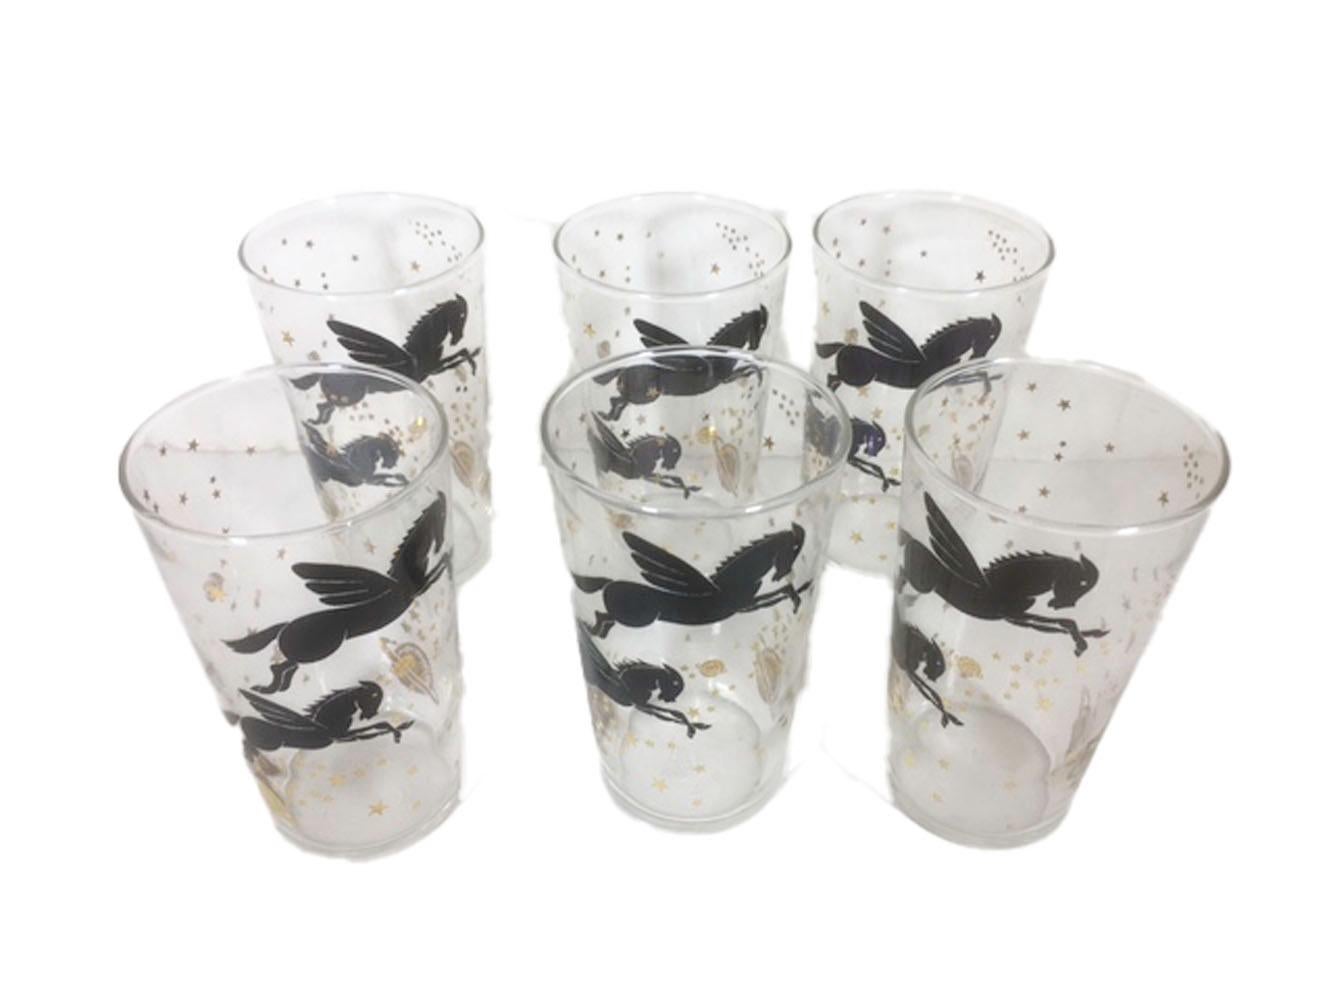 Set of 6, mid 20th century tumblers with images of the mythical winged horse Pegasus in black enamel among 22k gold stars and planets.